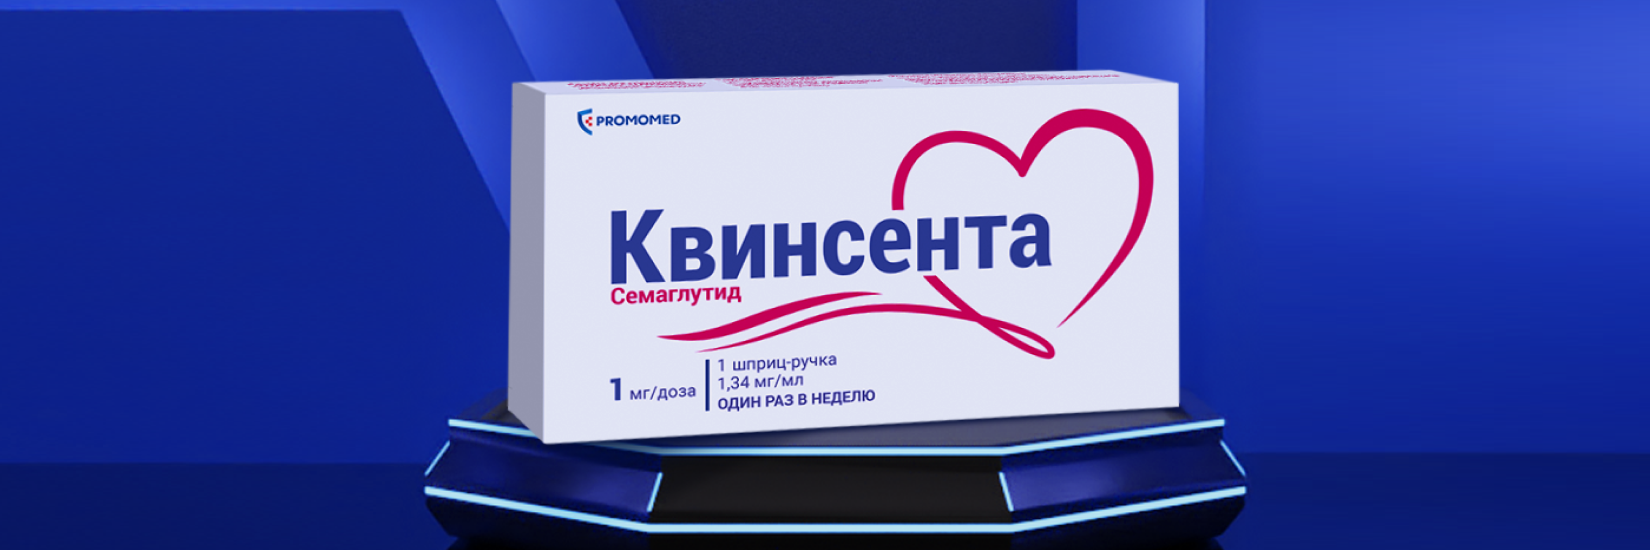 PROMOMED obtained permission to produce drug product for diabetes mellitus Kvinsenta with semaglutide